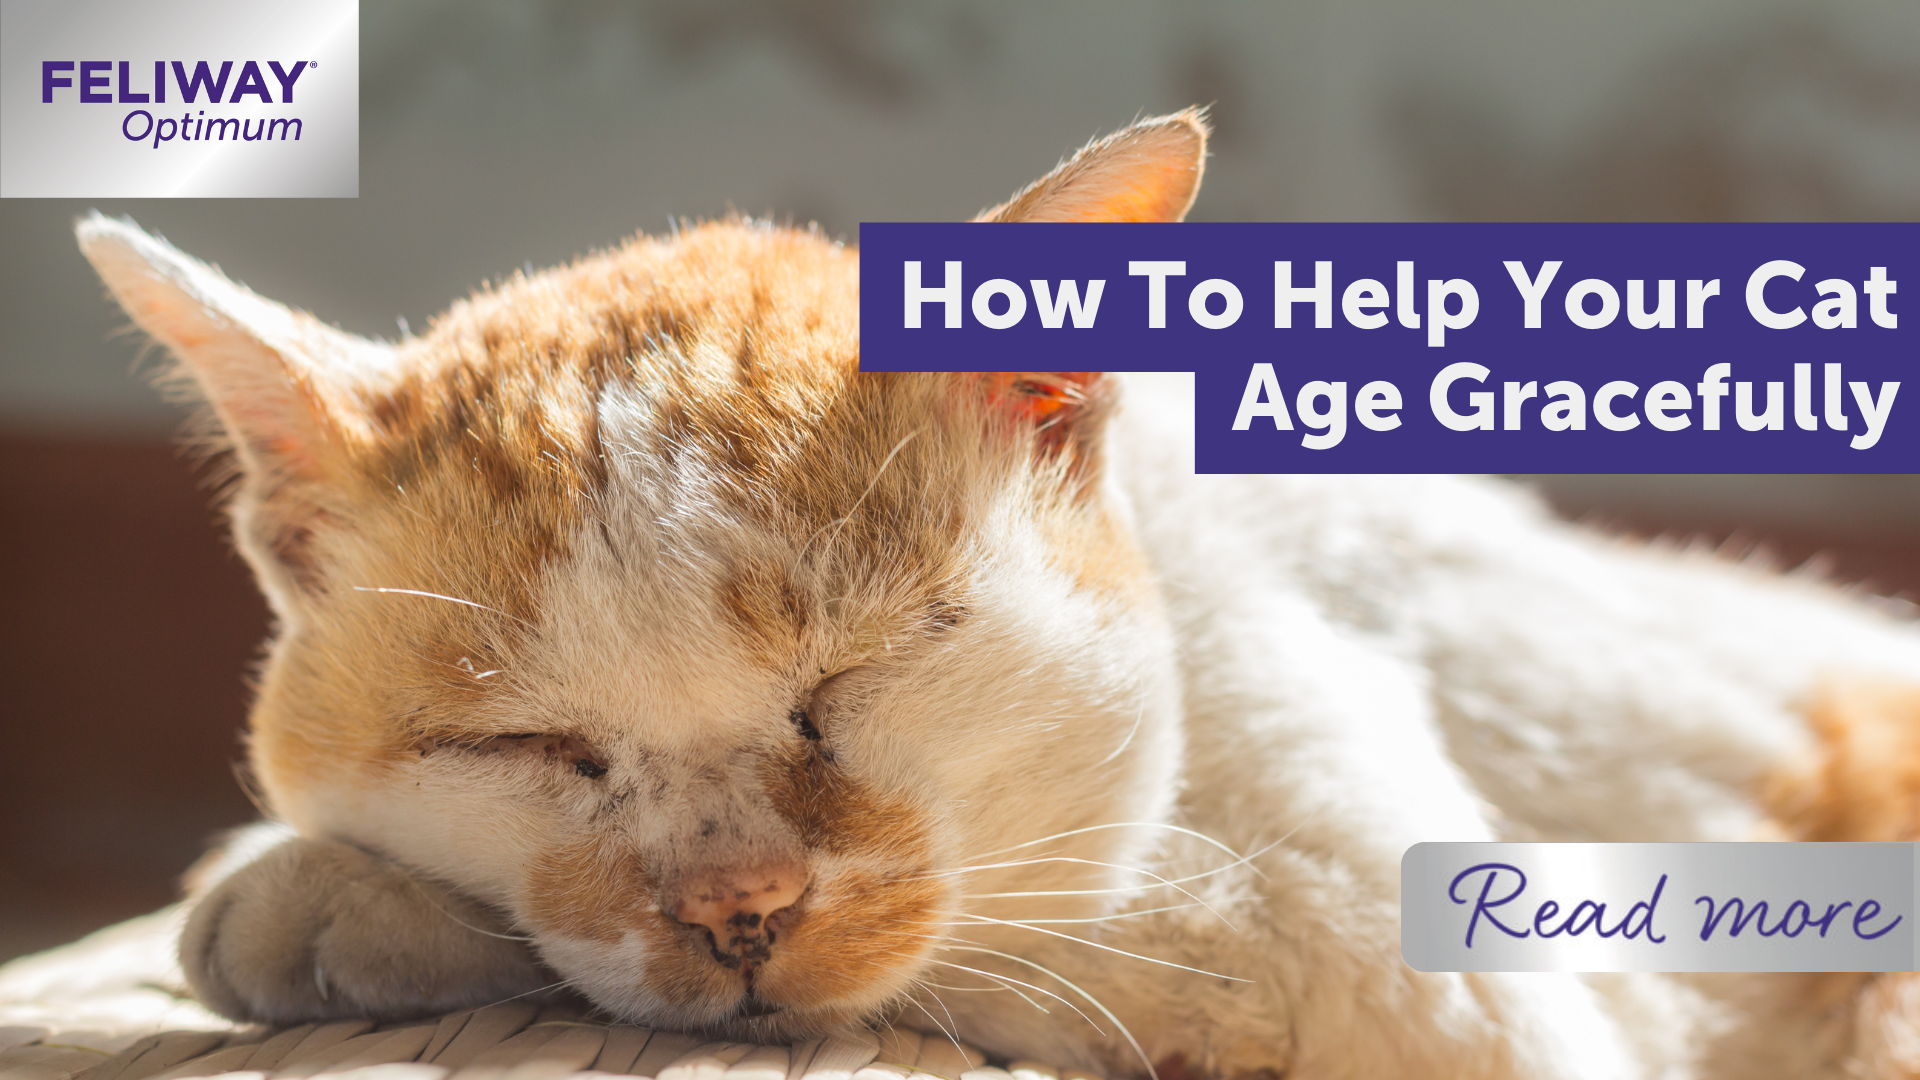 How To Help Your Cat Age Gracefully